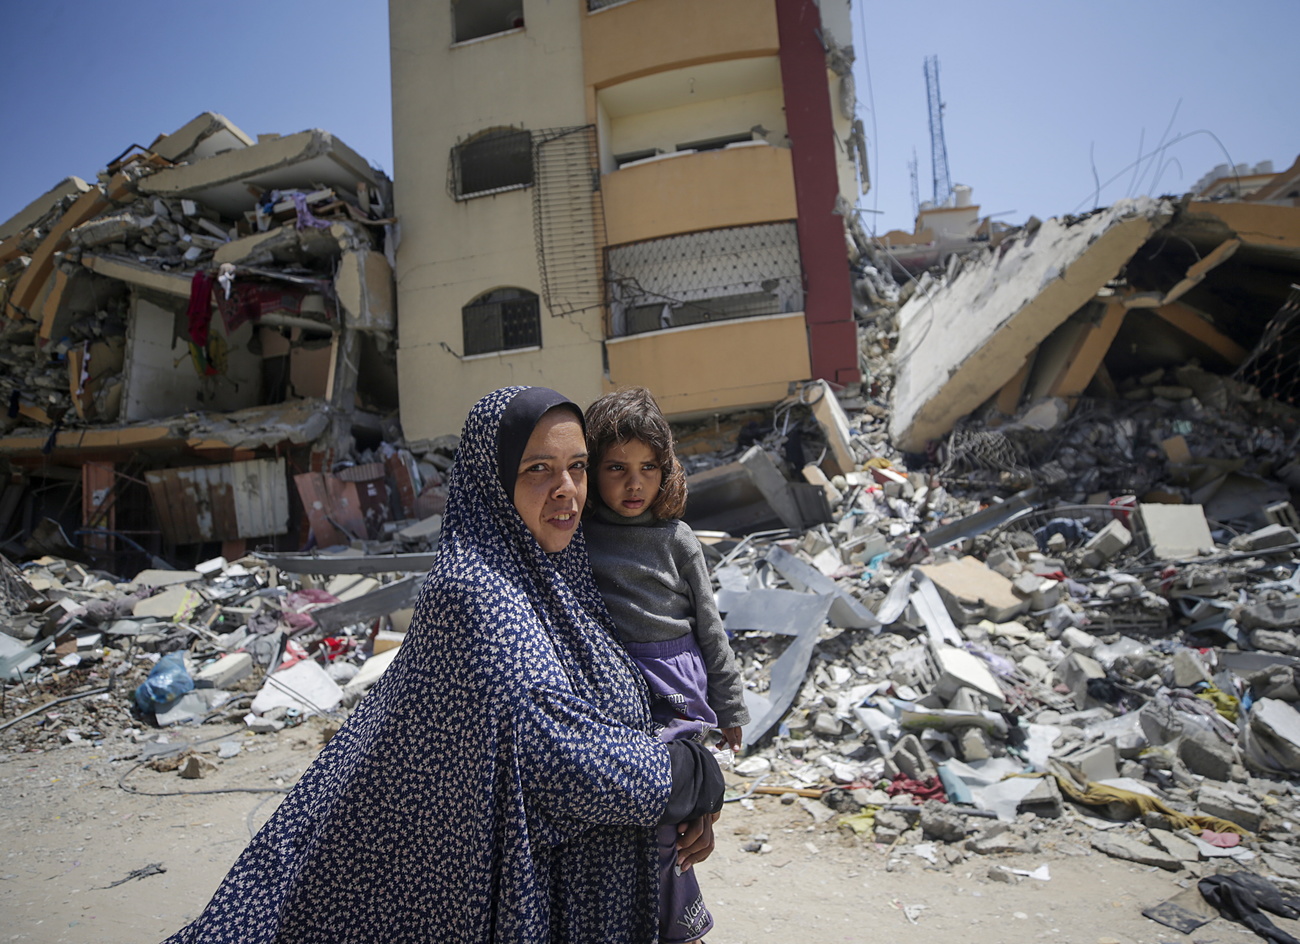 Picture of a woman holding a child in Gaza with rubble in the background